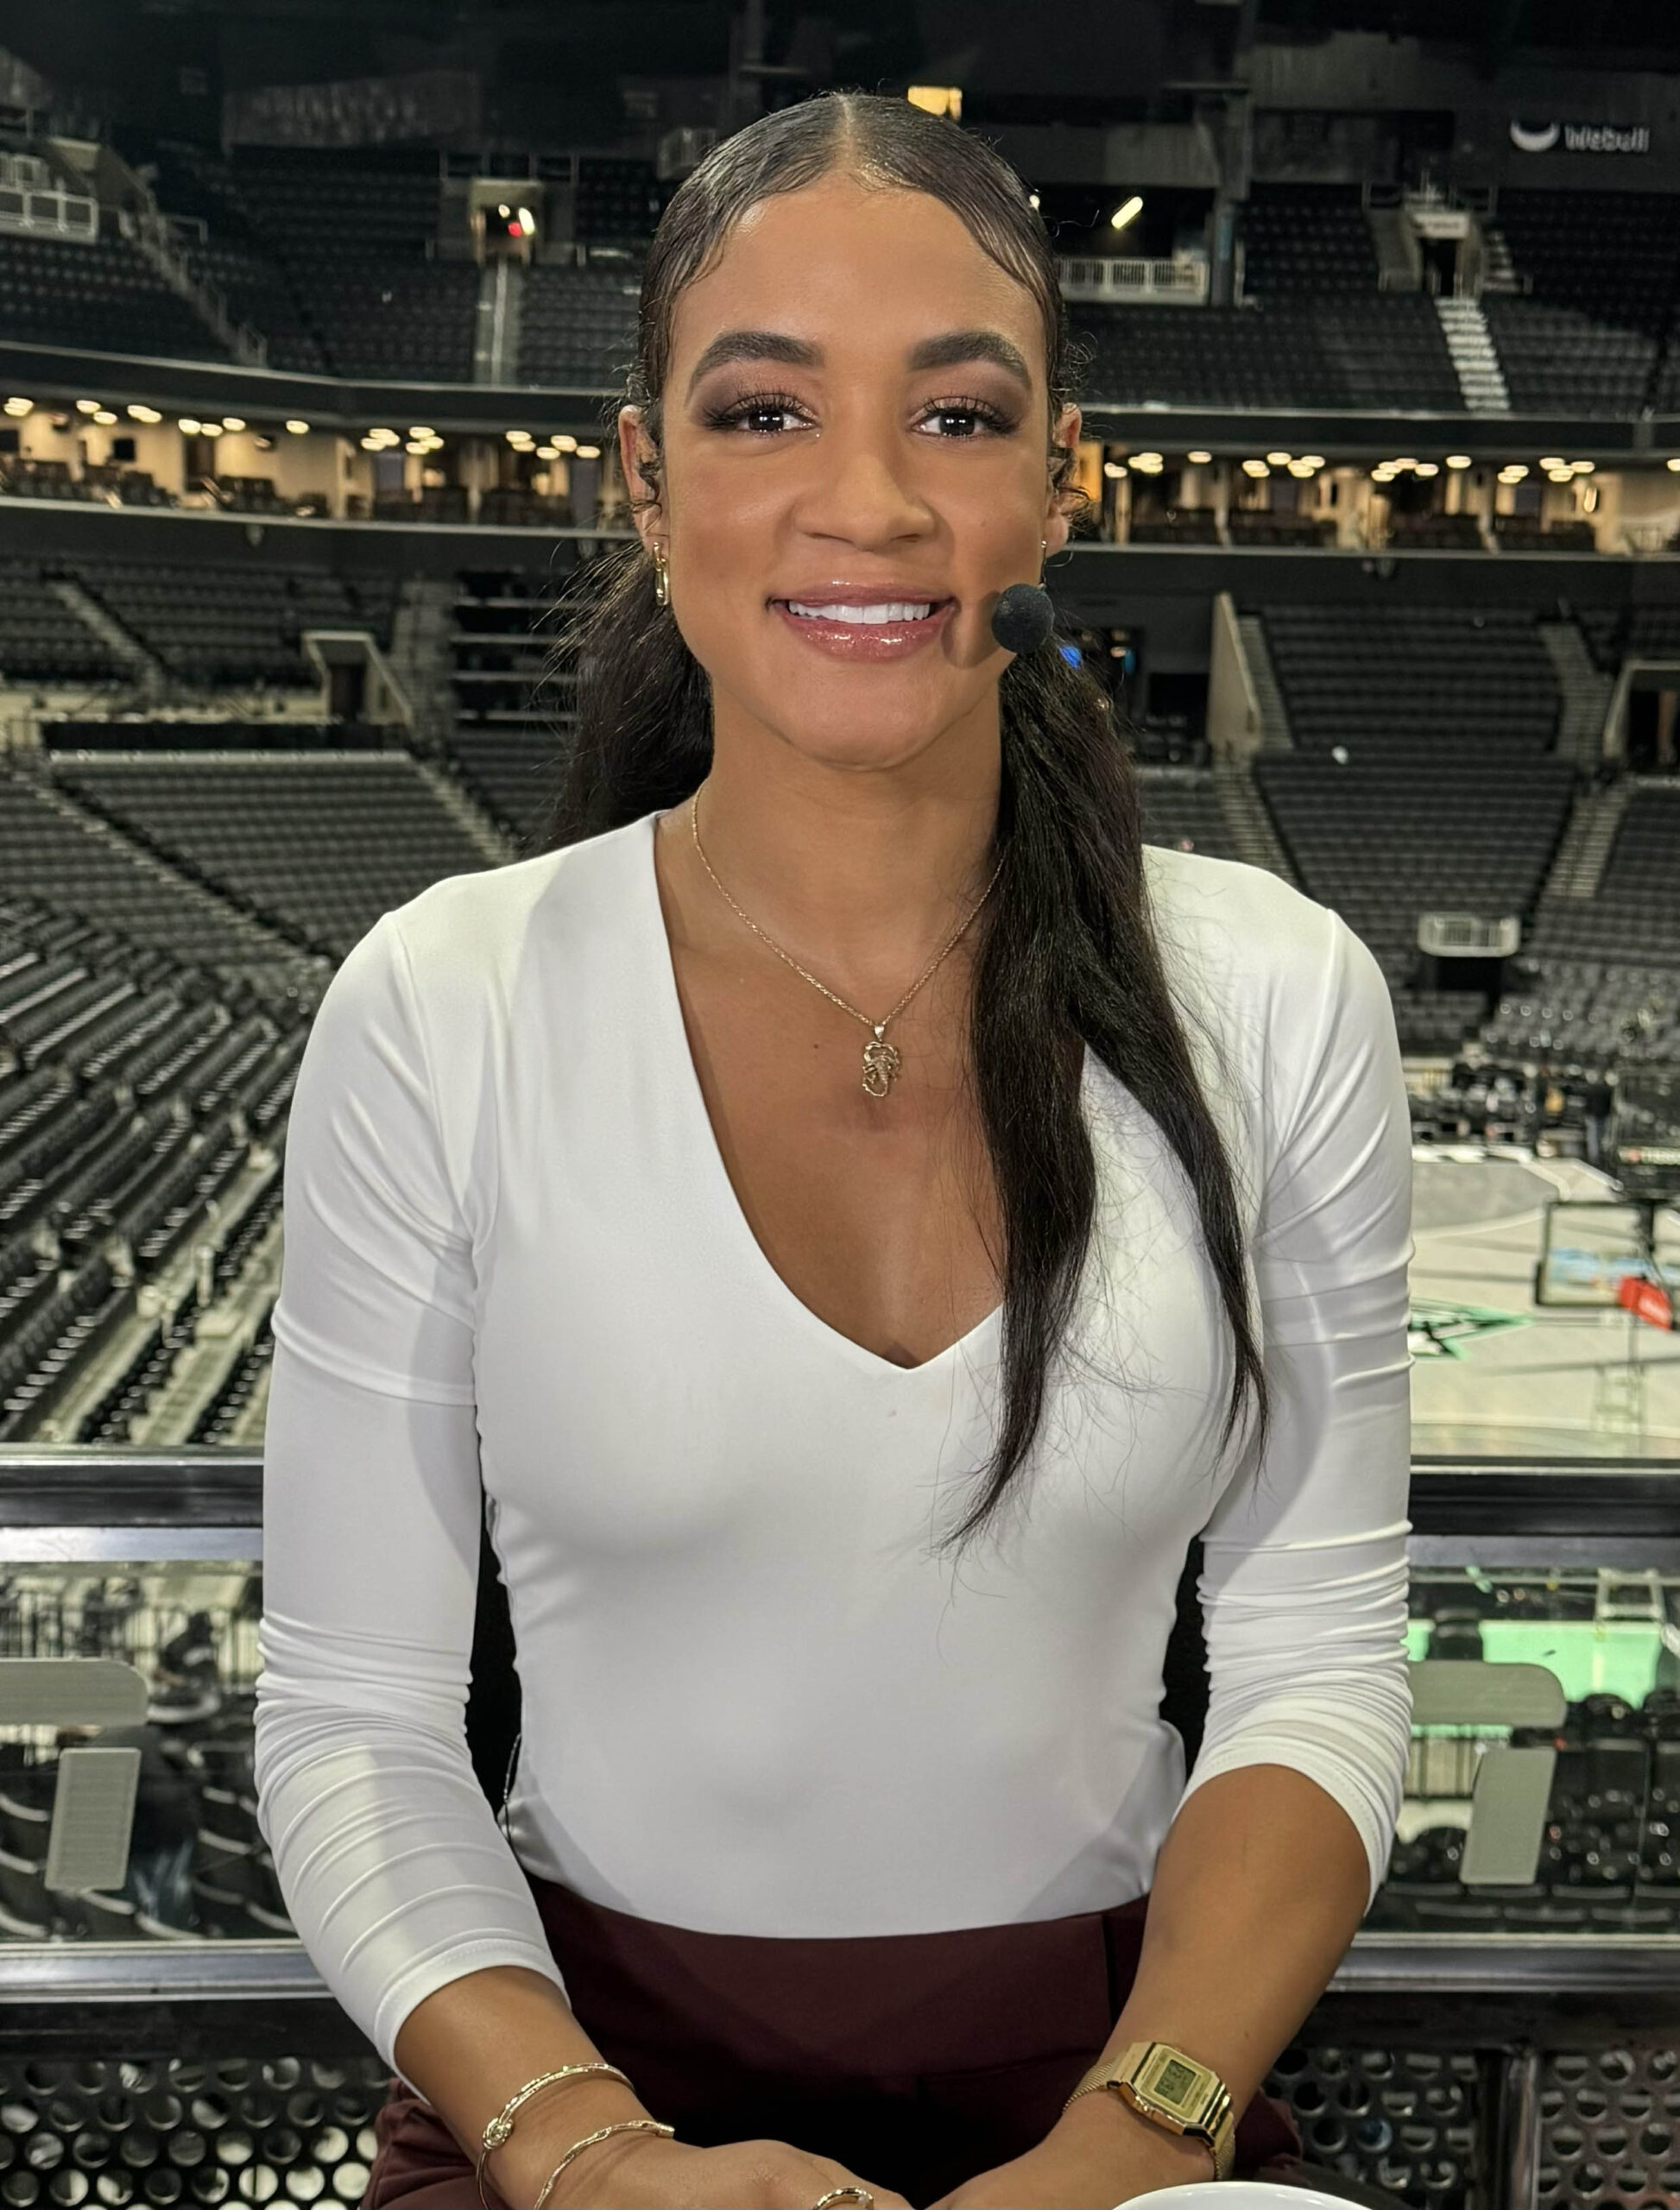 Andraya Carter is sitting in an arena preparing for a broadcast. She has dark skin and black hair. She is smiling in the photo. 